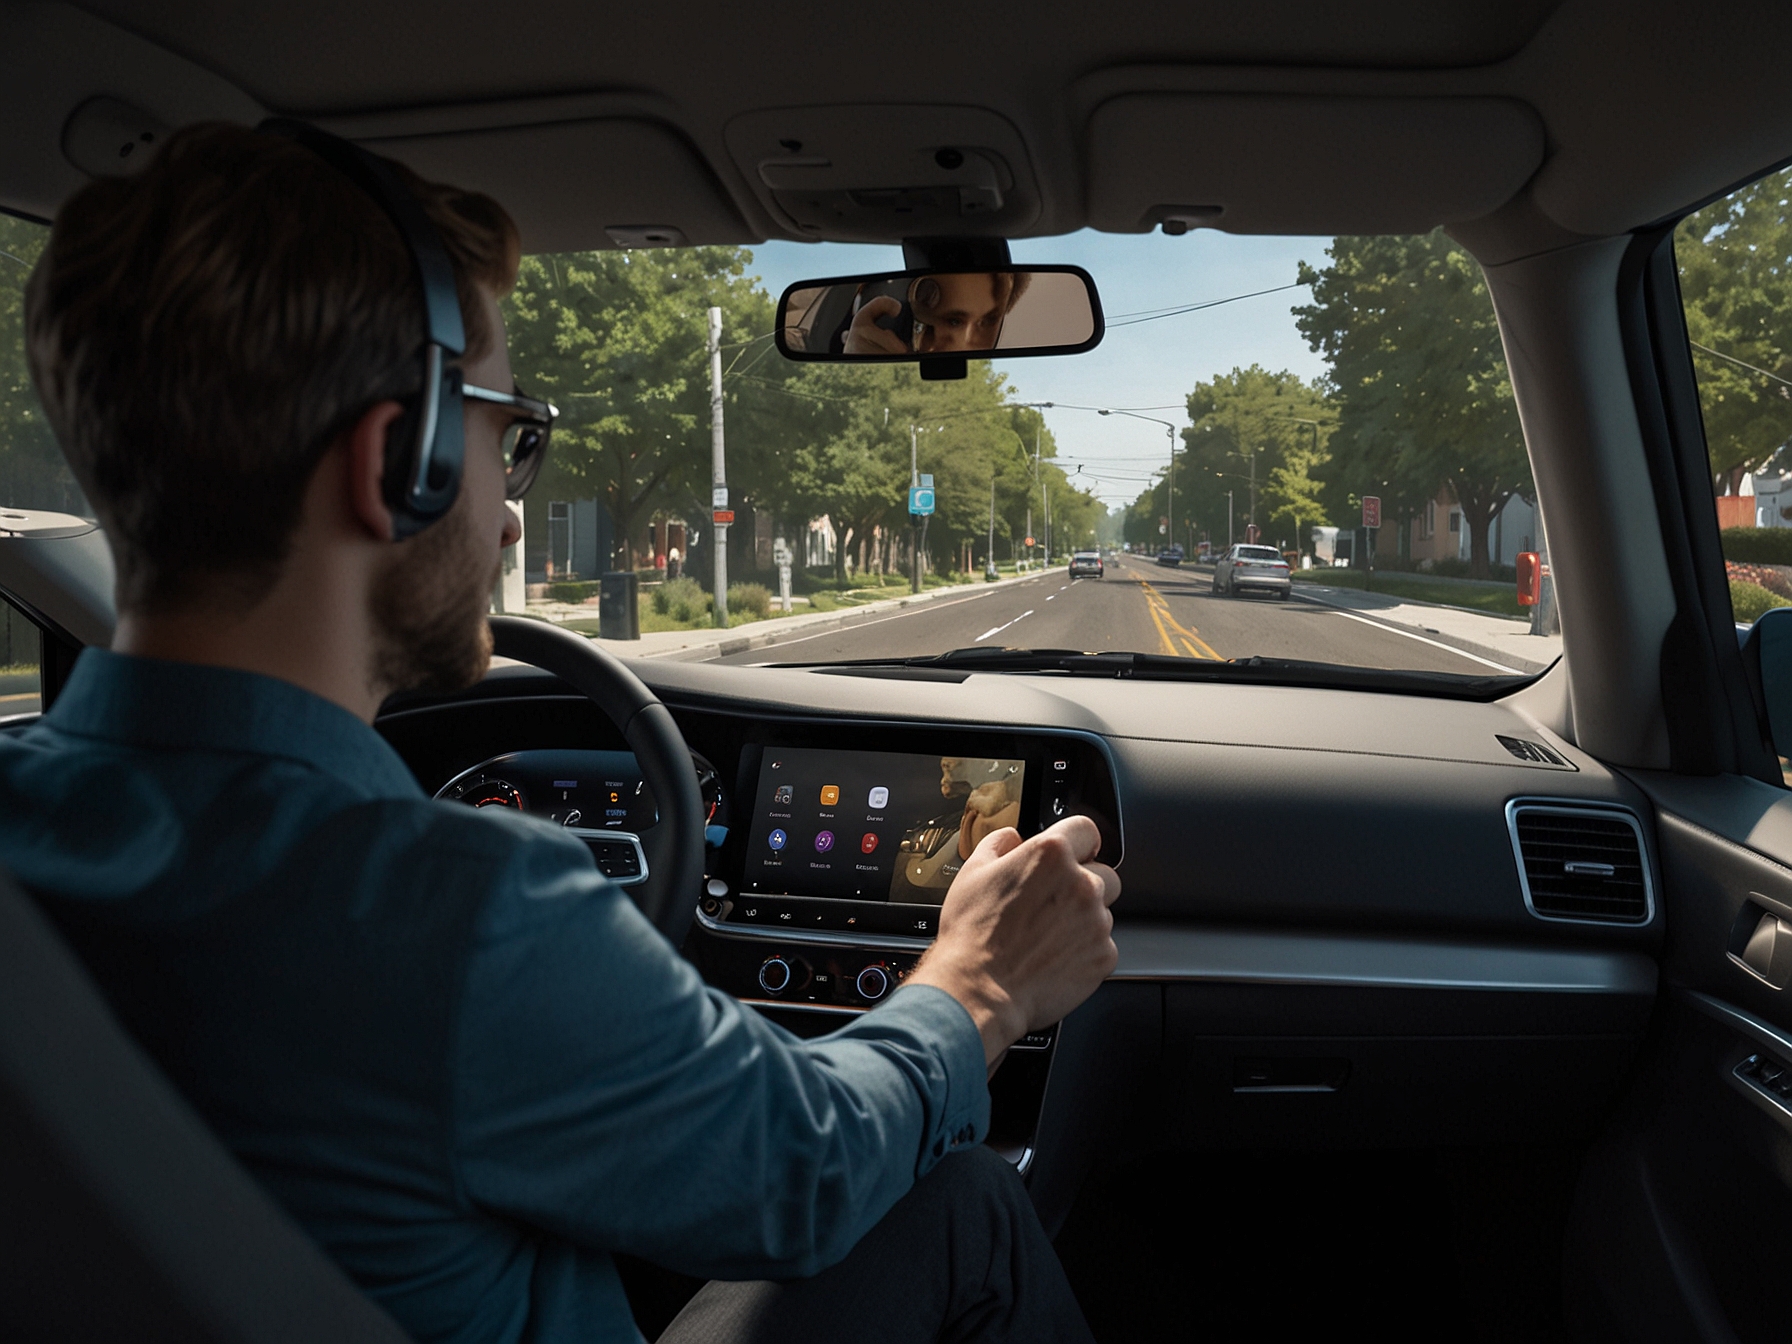 Driver using voice commands to interact with the redesigned Google Assistant in Android Automotive, demonstrating hands-free control over navigation, media playback, and smart home devices.